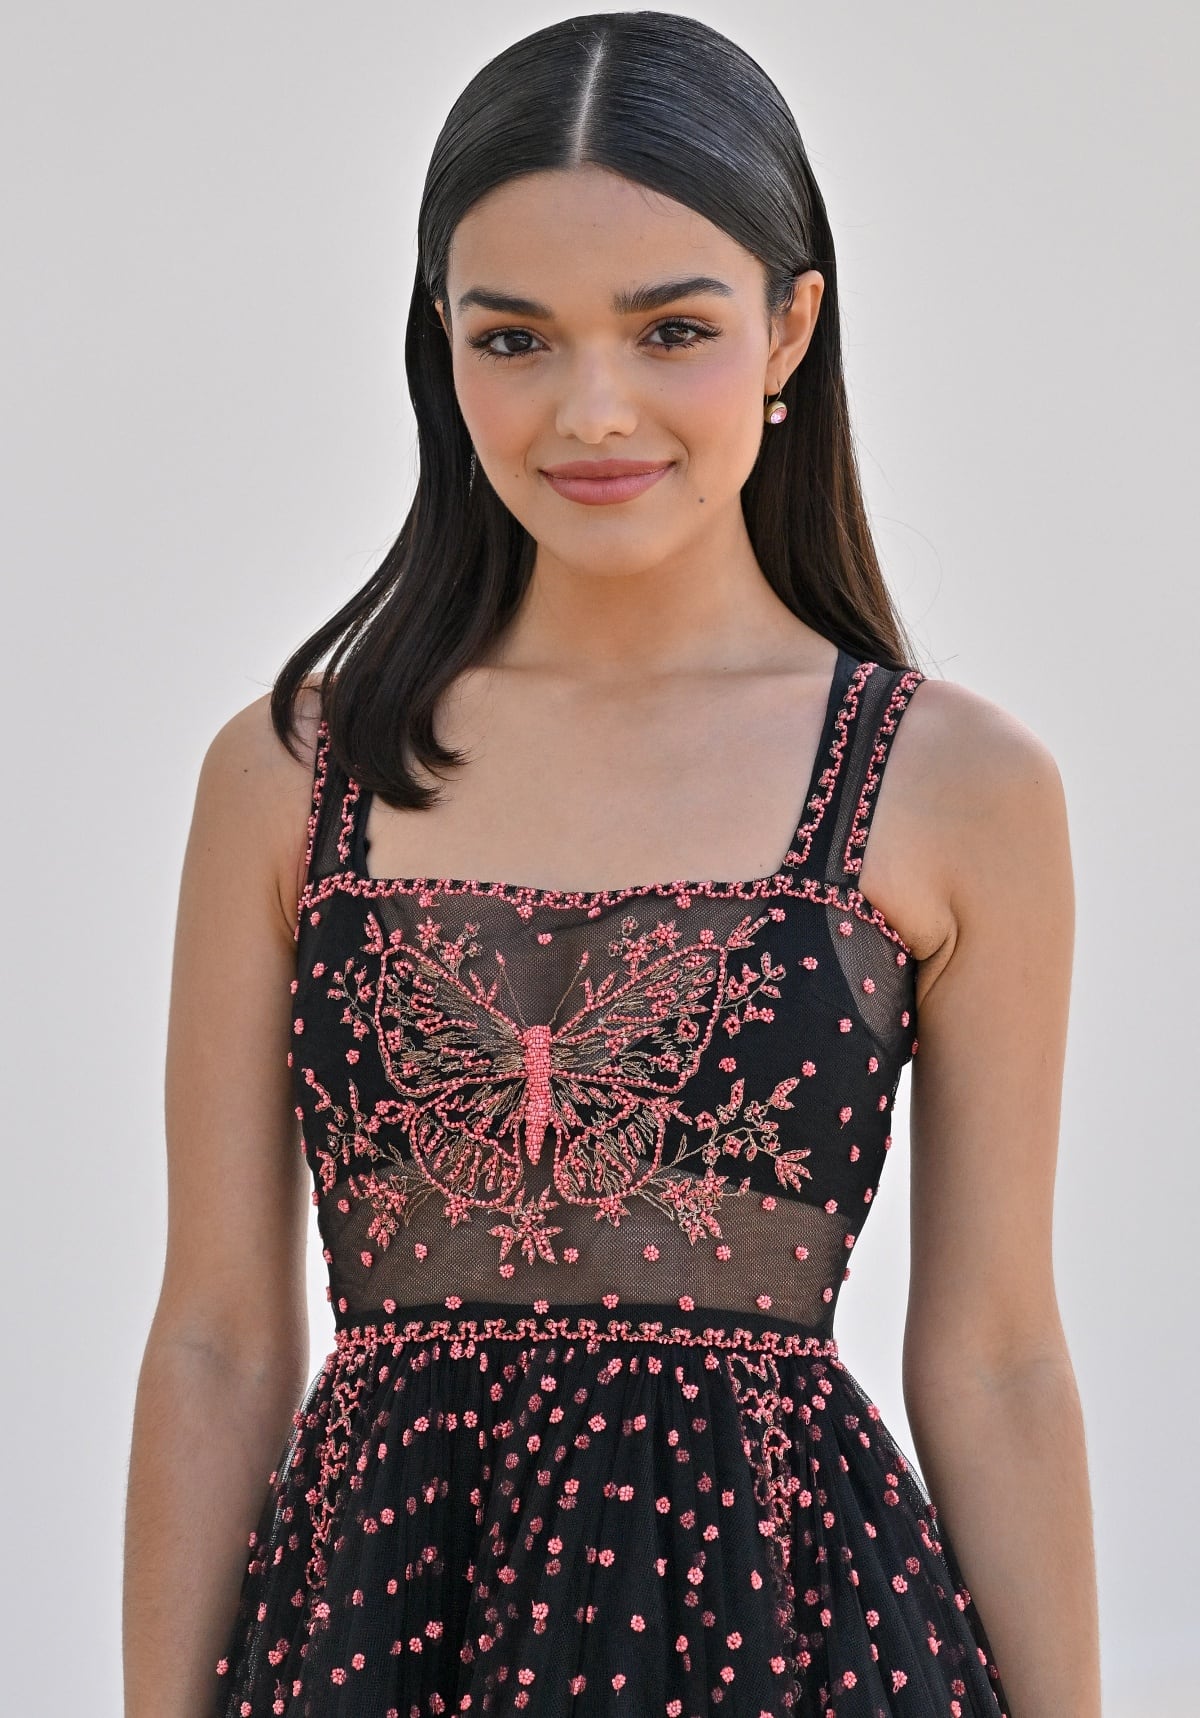 Rachel Zegler wearing a black and pink butterfly-embellished gown with minimal jewelry, sleek black hair, and a simple makeup palette